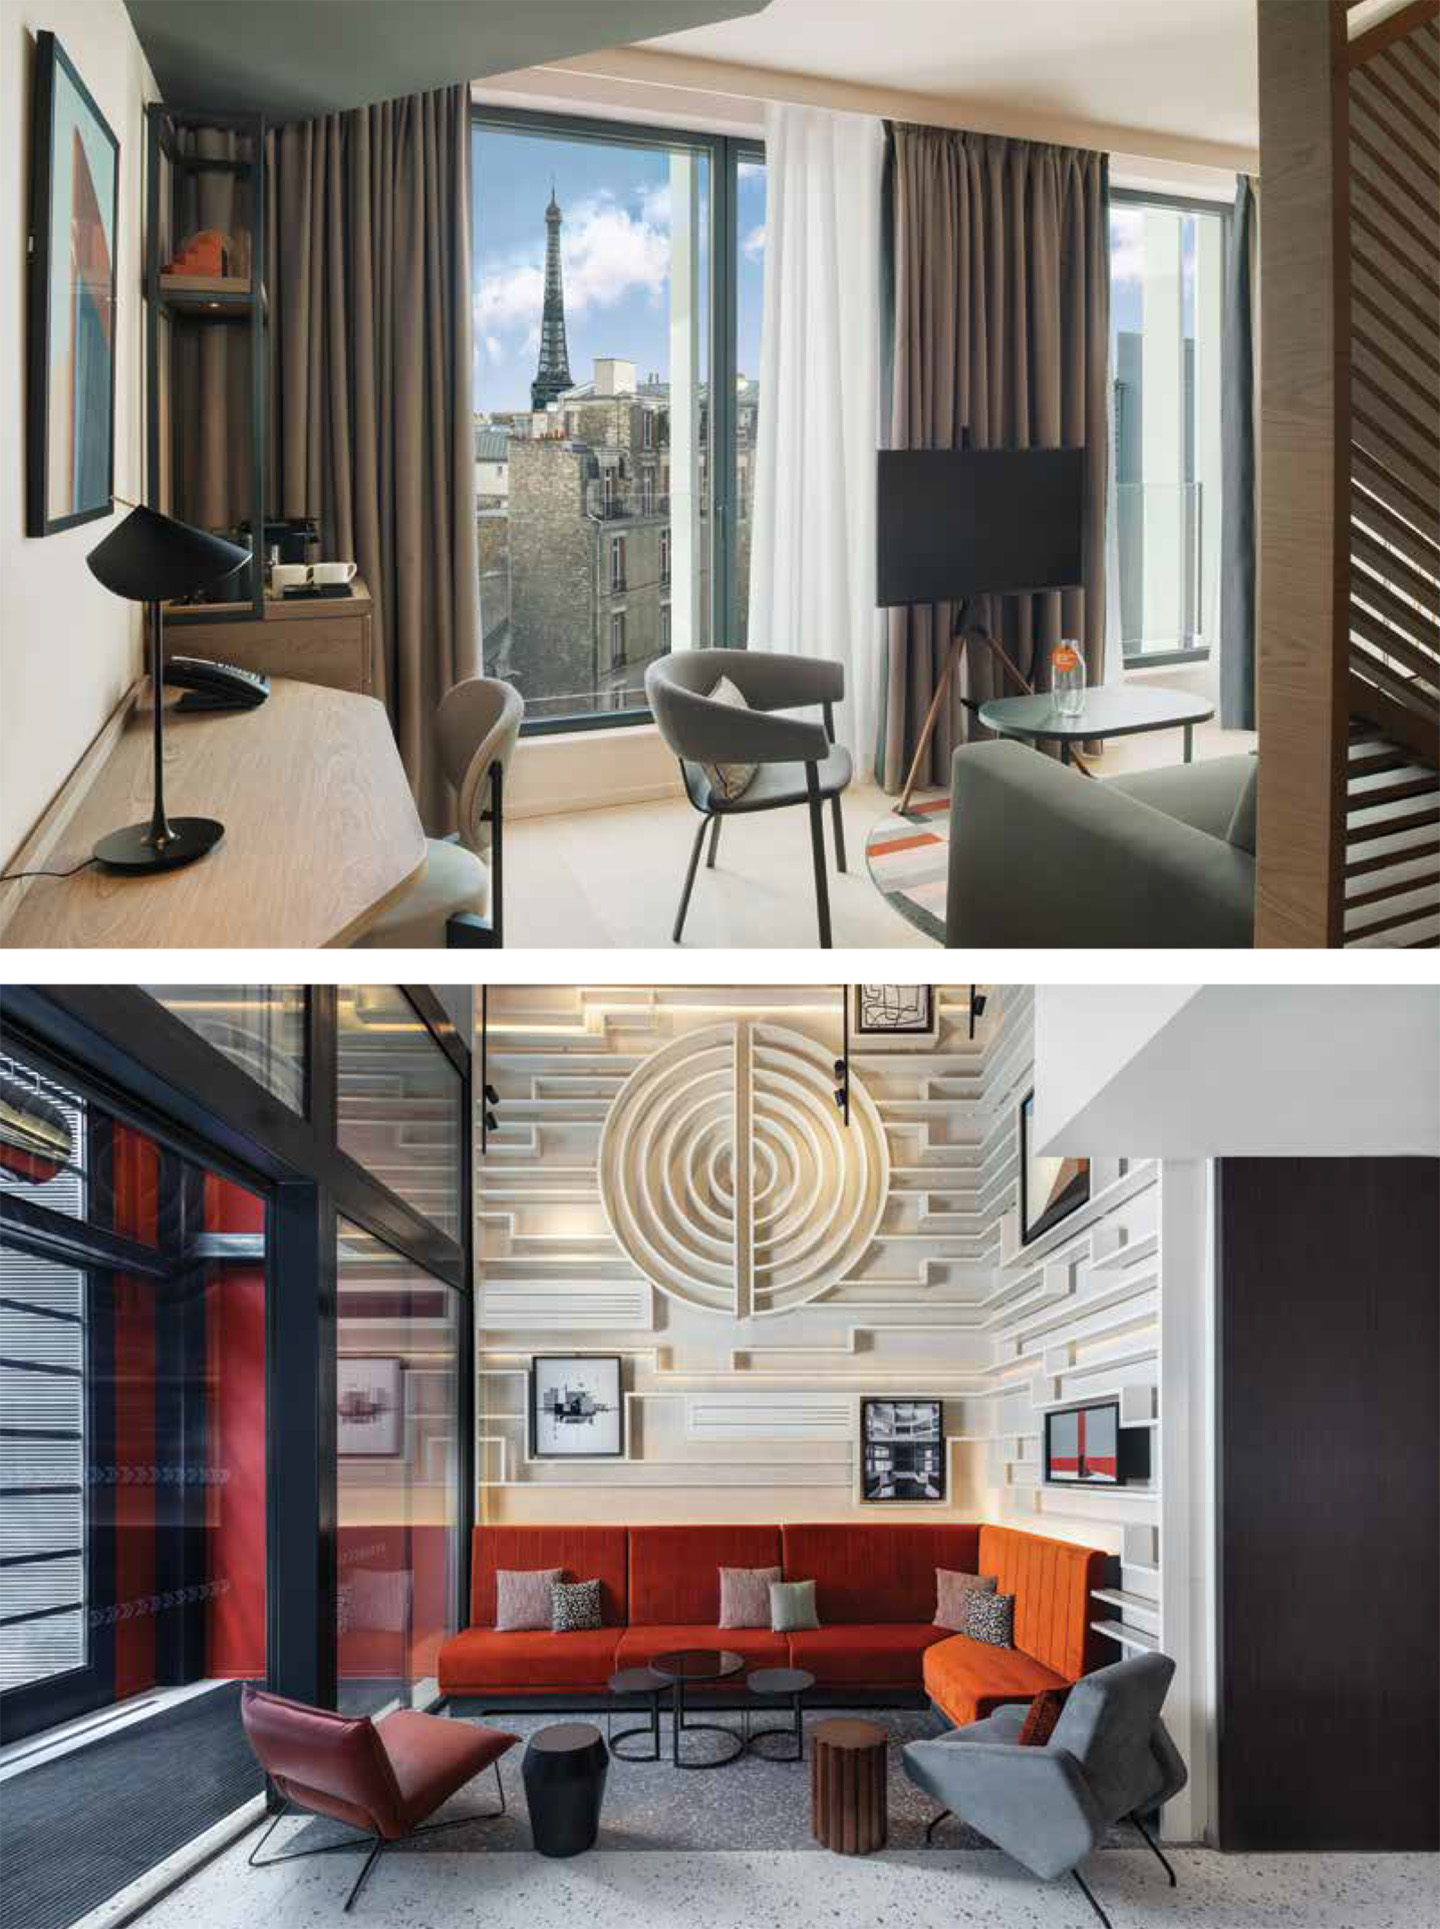 Article on the Canopy by Hilton Paris Trocadero designed by jean-Philippe Nuel studio in archistorm magazine, new lifestyle hotel, luxury interior design, paris center, french luxury hotel